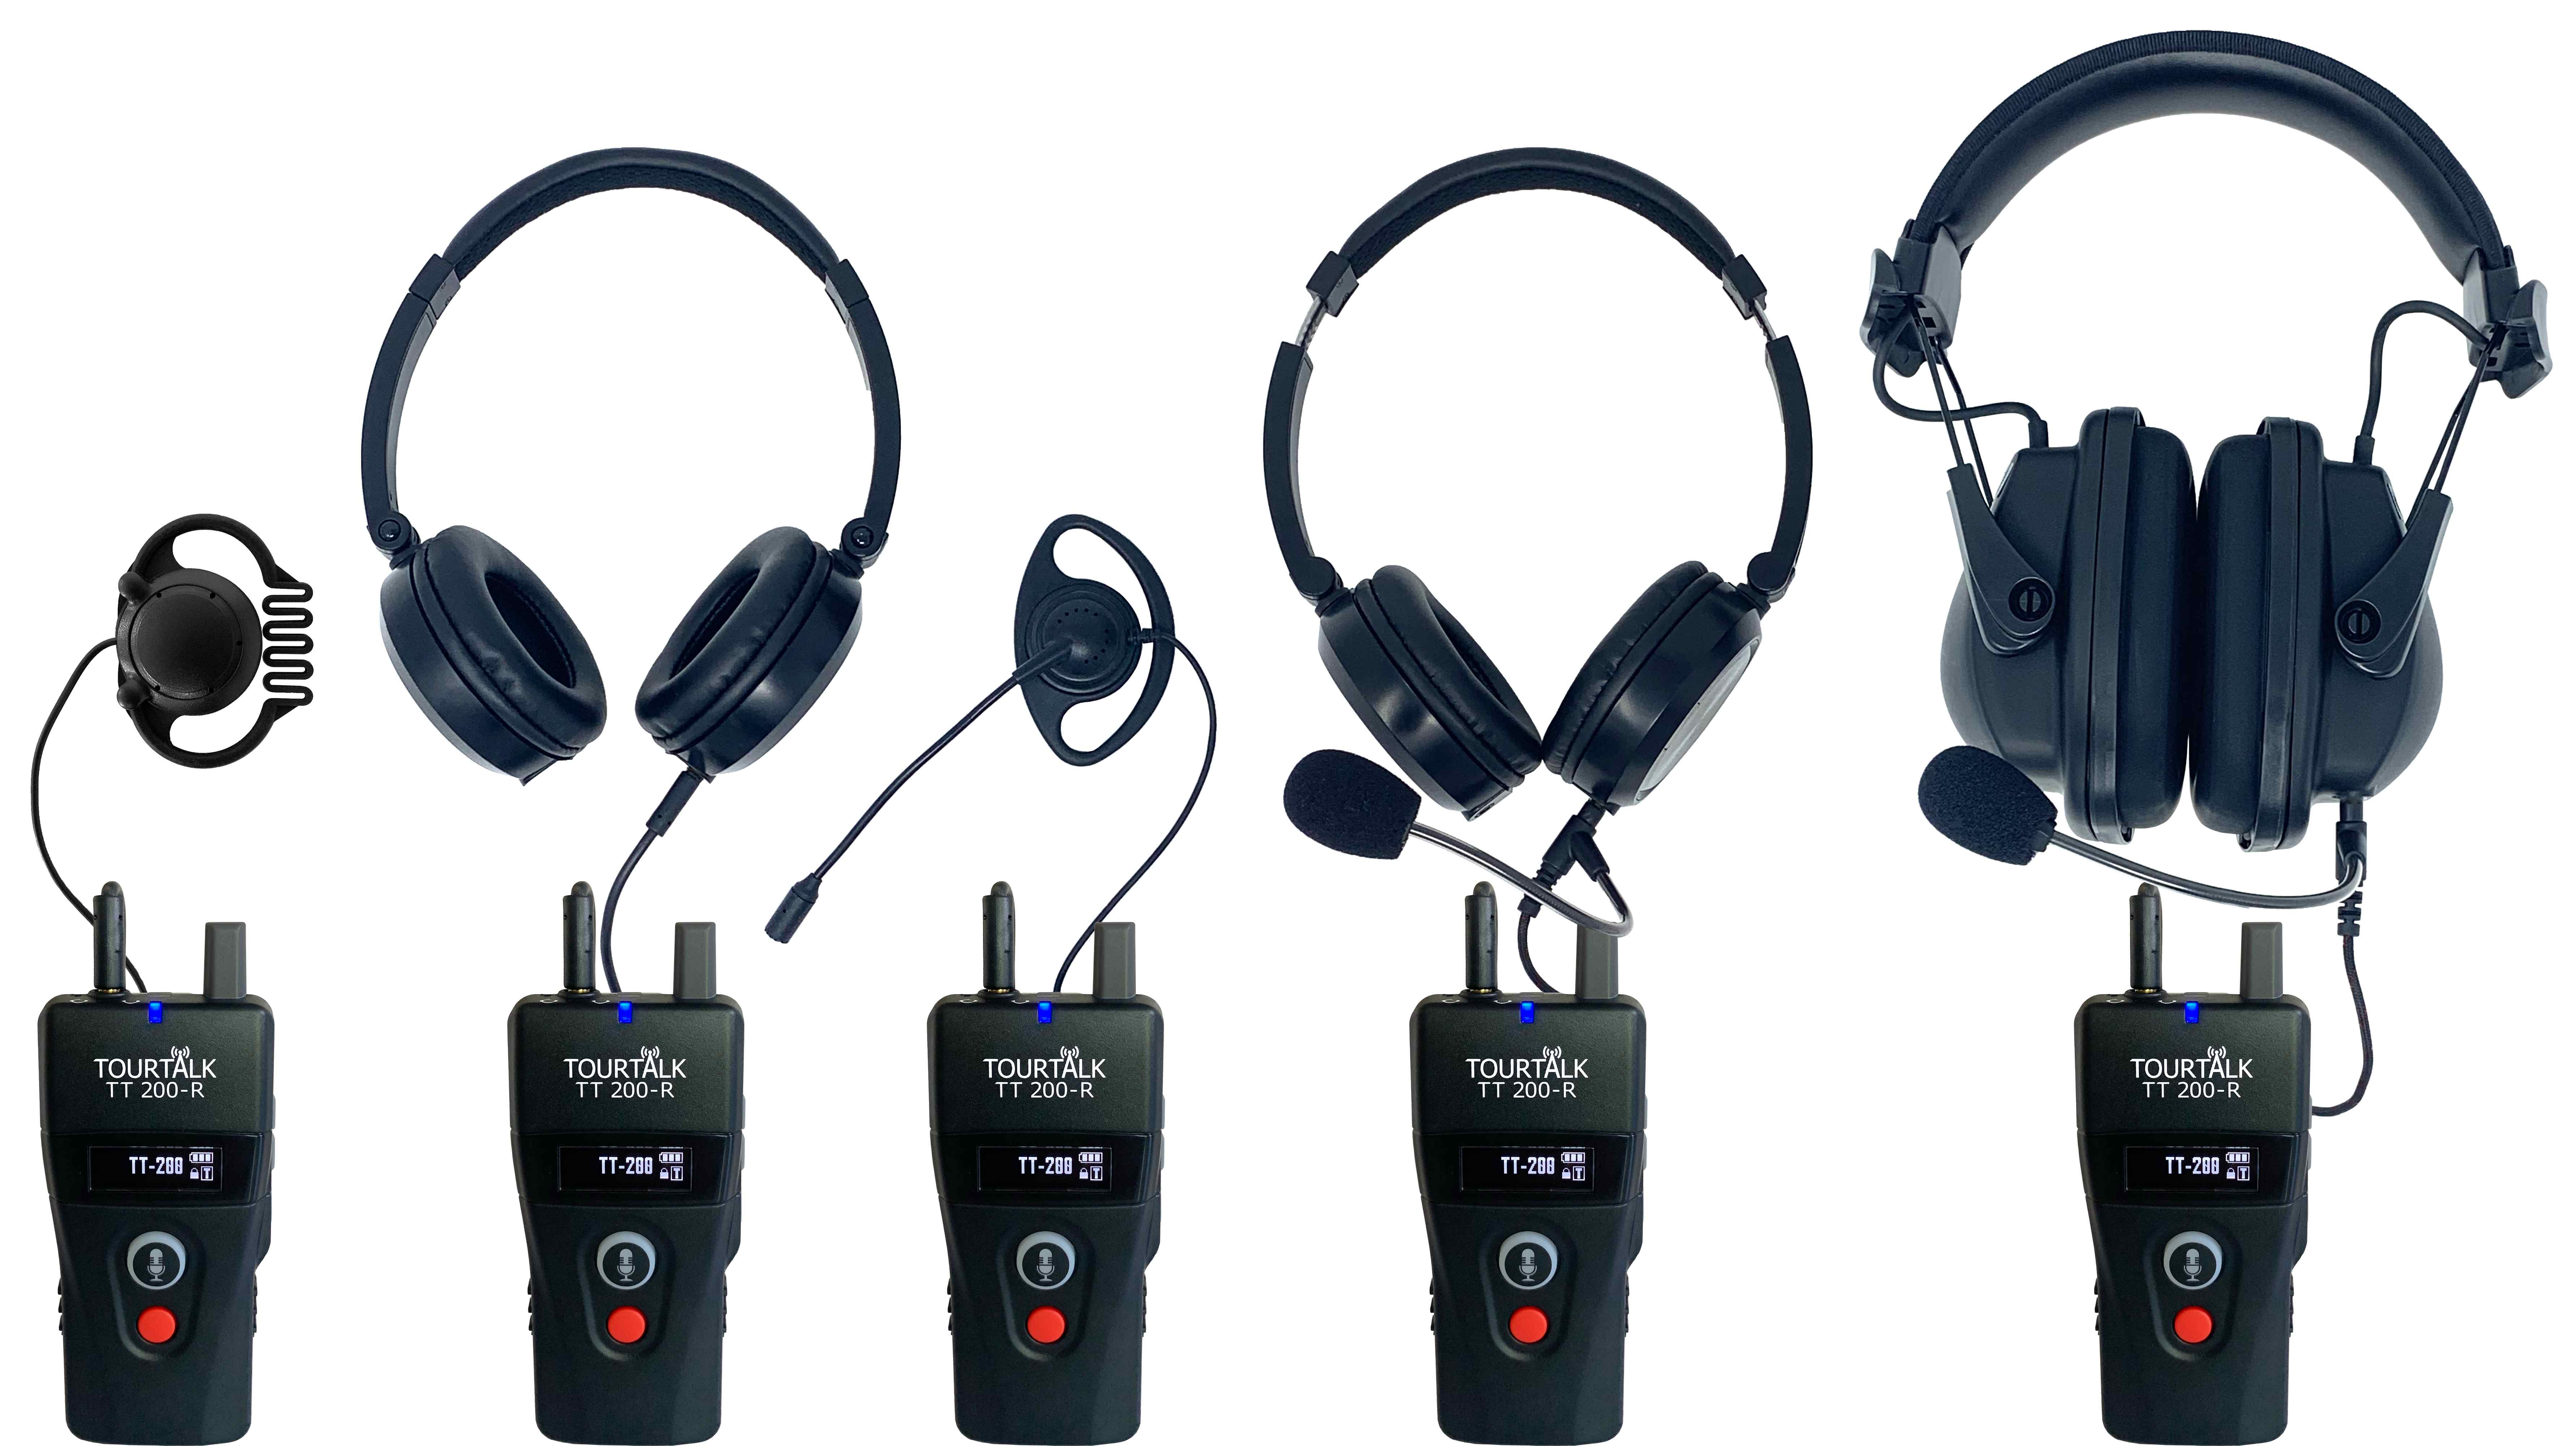 Tourtalk TT 200 receivers with headsets